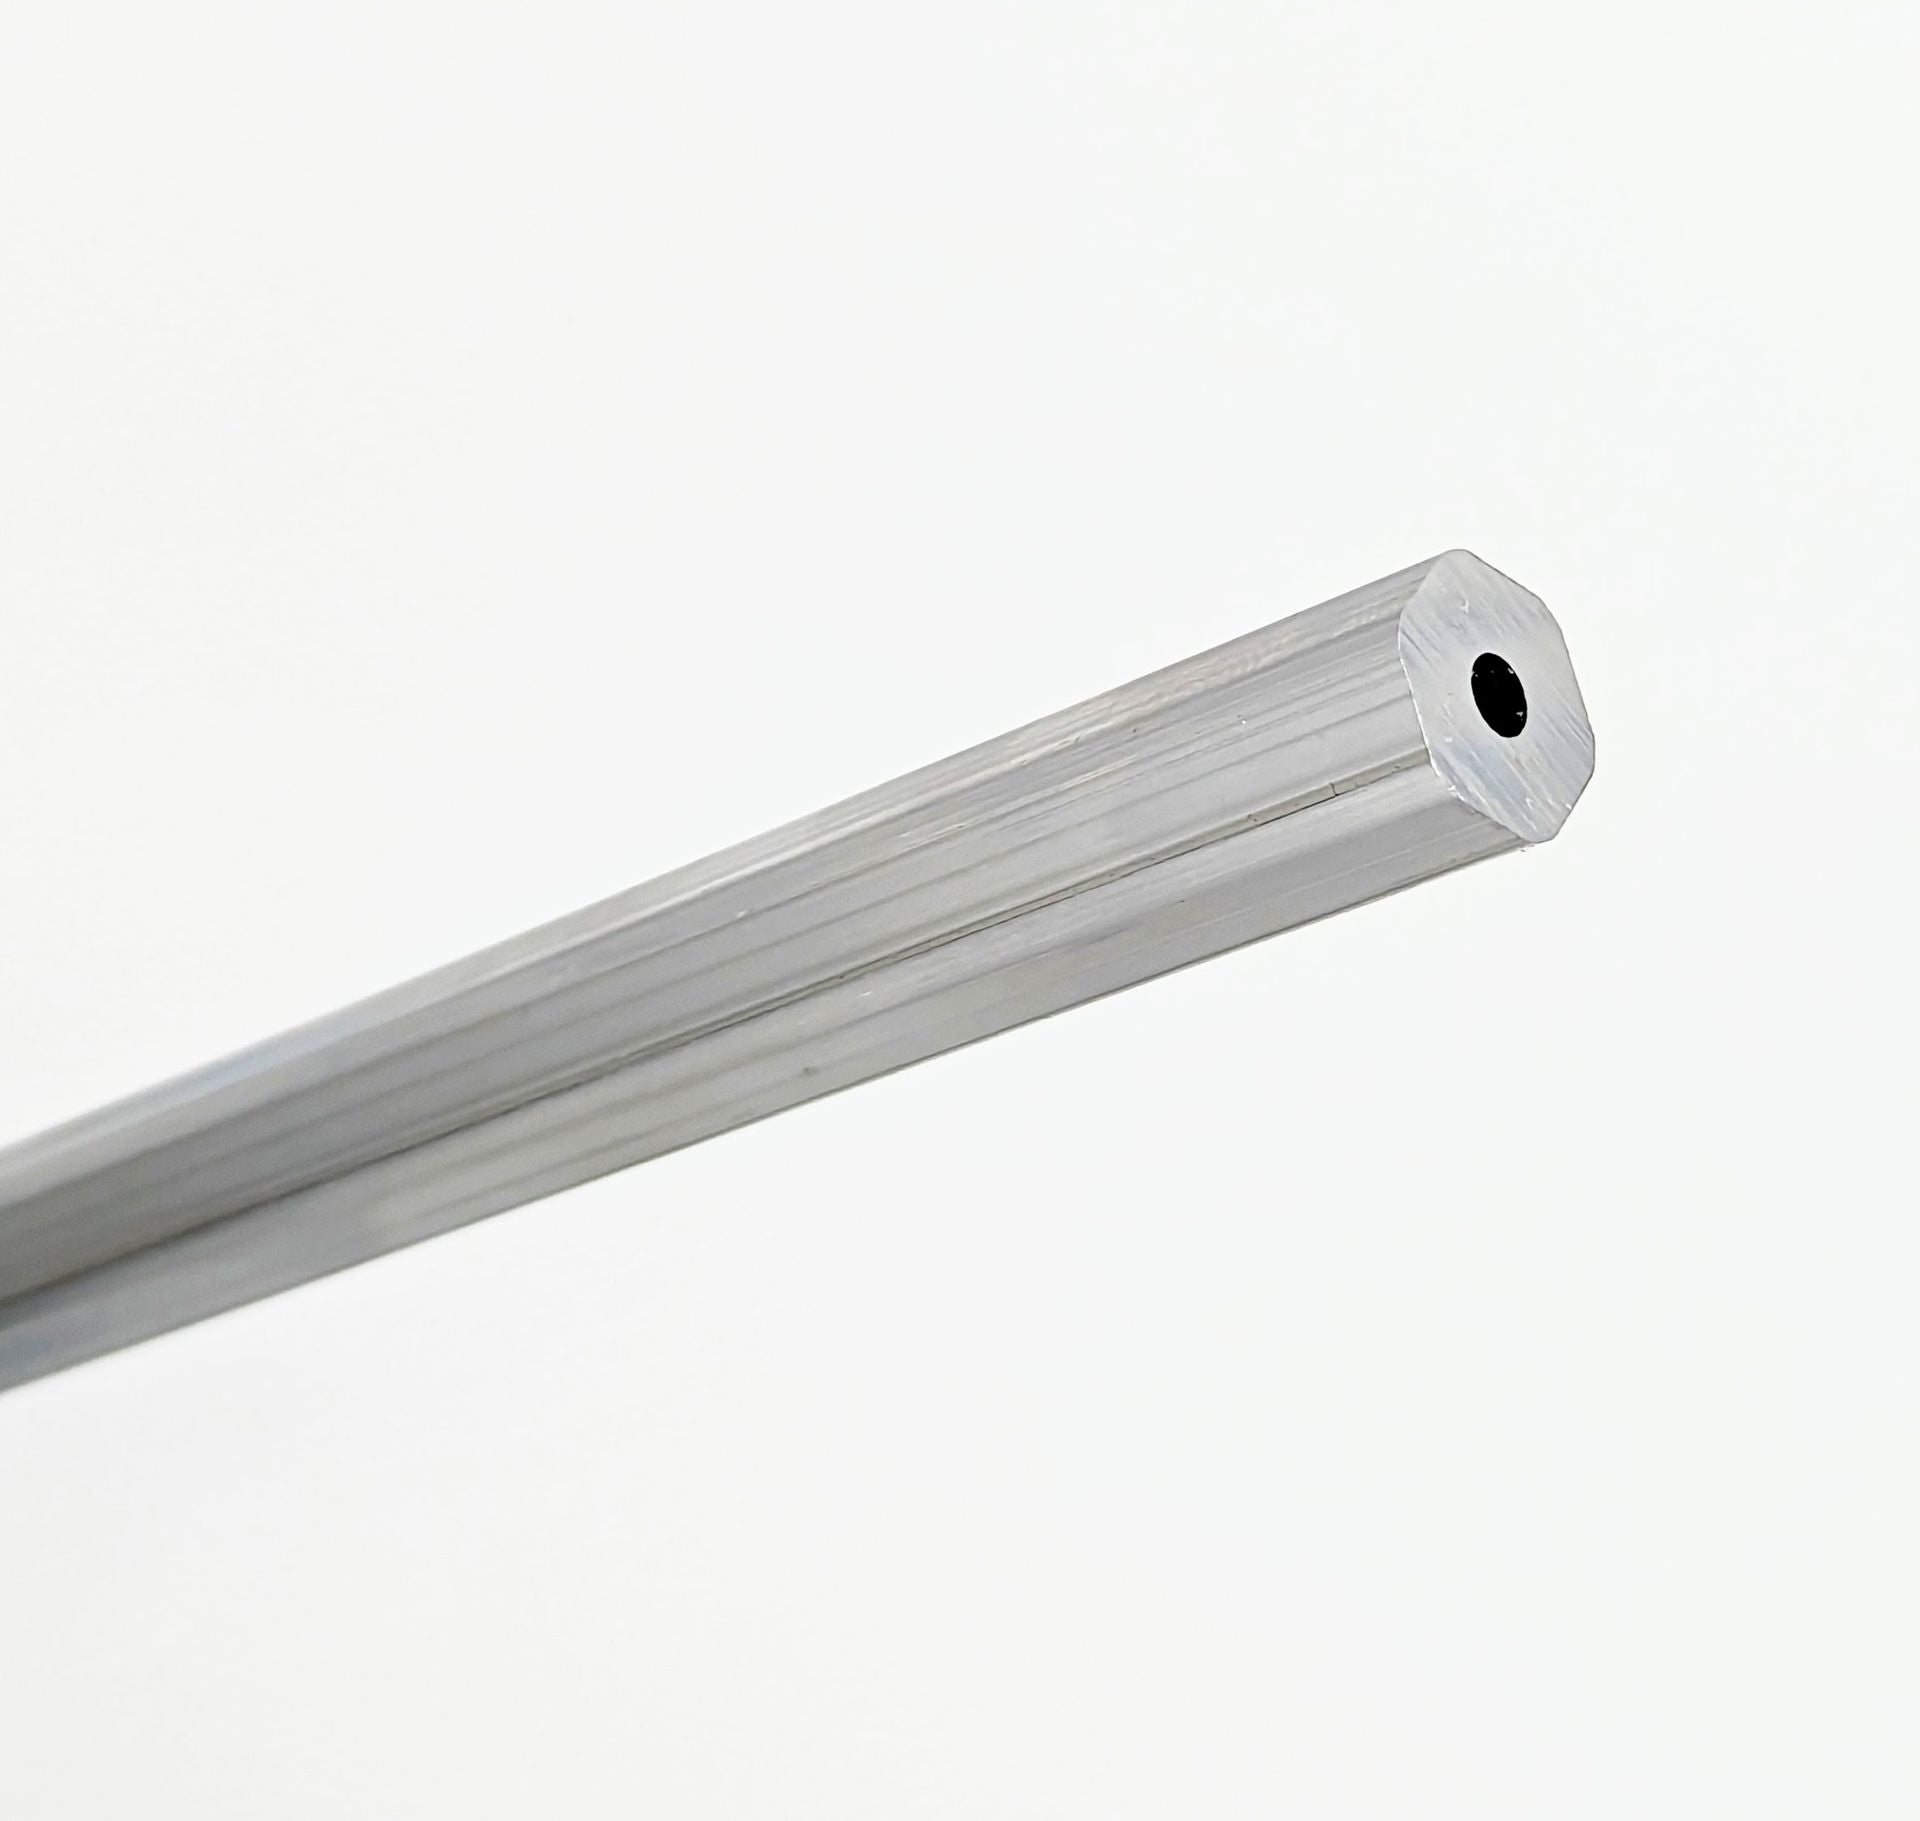 QTY 1 - 36 Inch Long 1/2" Rounded Hex Shaft - 6061 Aluminum